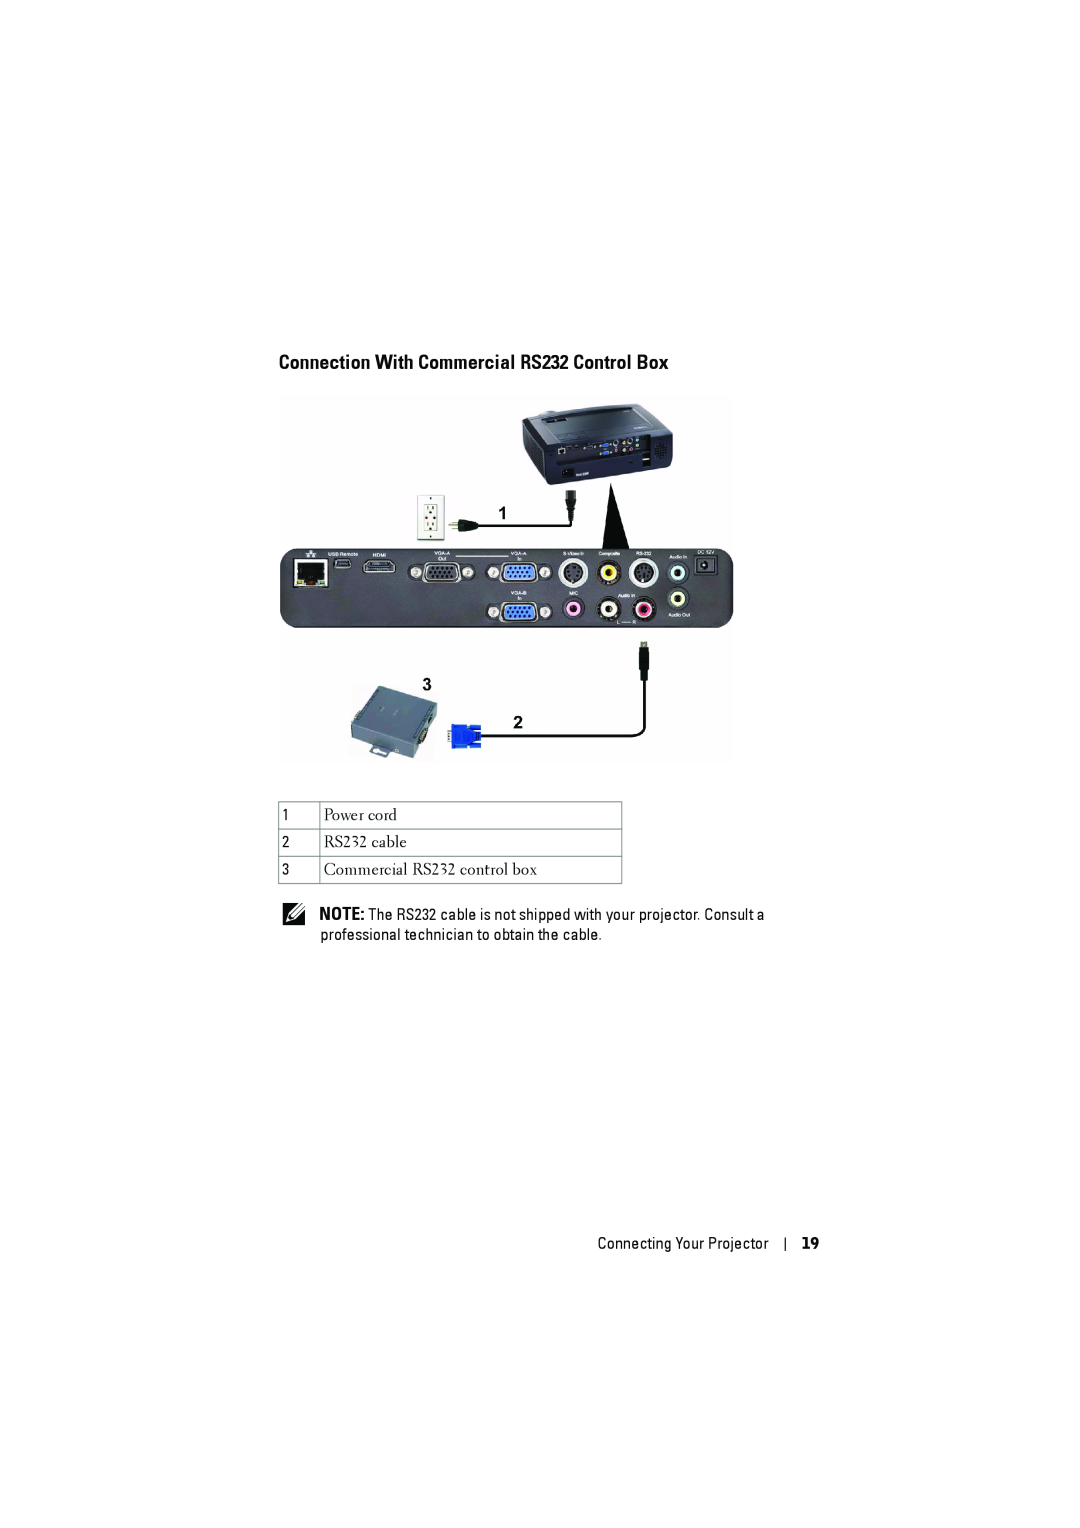 Dell S300 manual Connection With Commercial RS232 Control Box, Power cord RS232 cable Commercial RS232 control box 